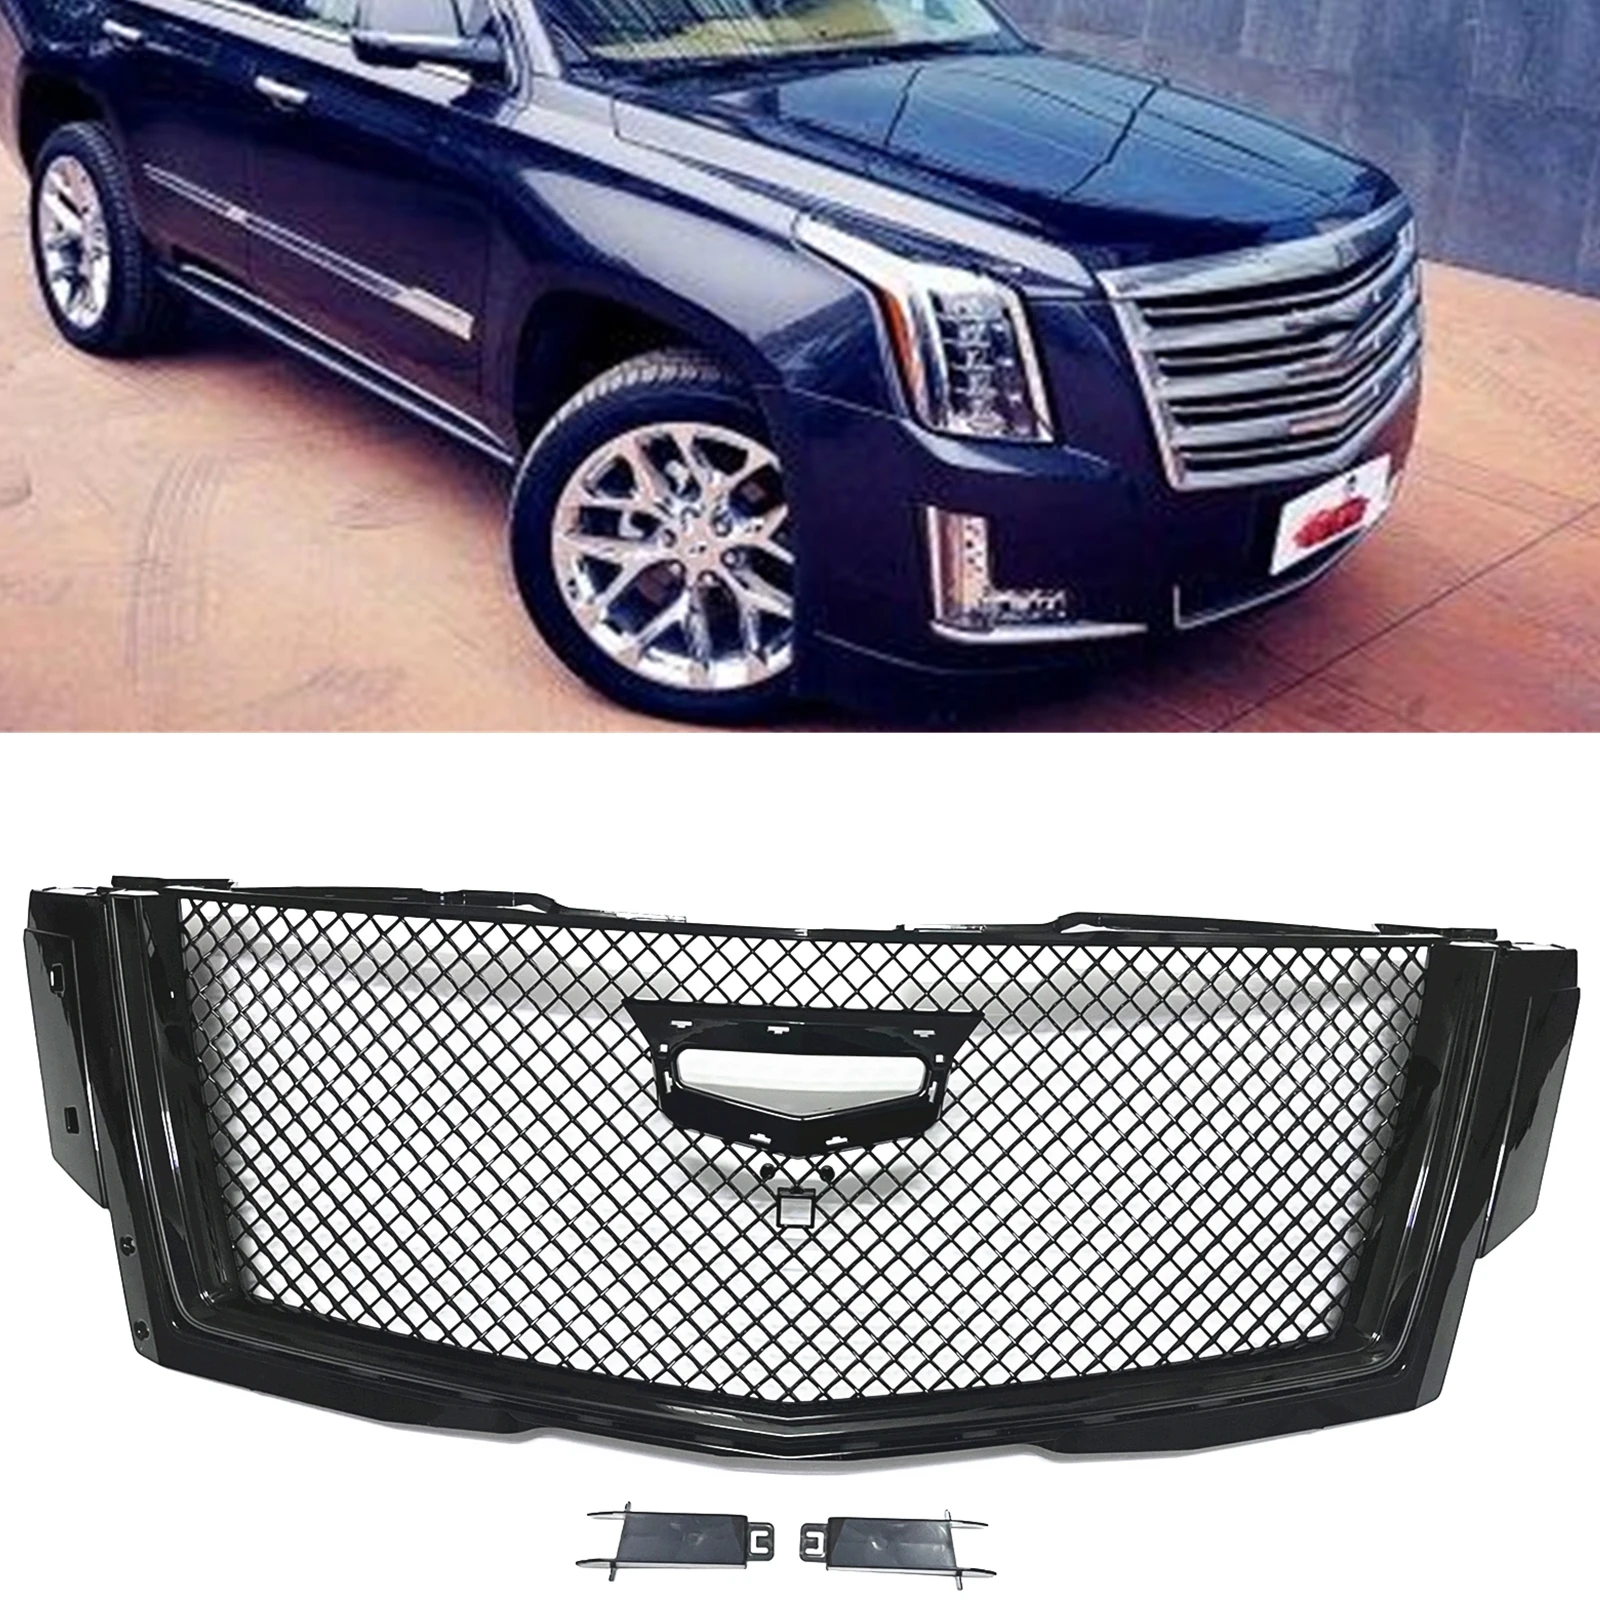 

Car Upper Bumper Hood Front Grille Grill Mesh Grid For Cadillac Escalade 2015-2020